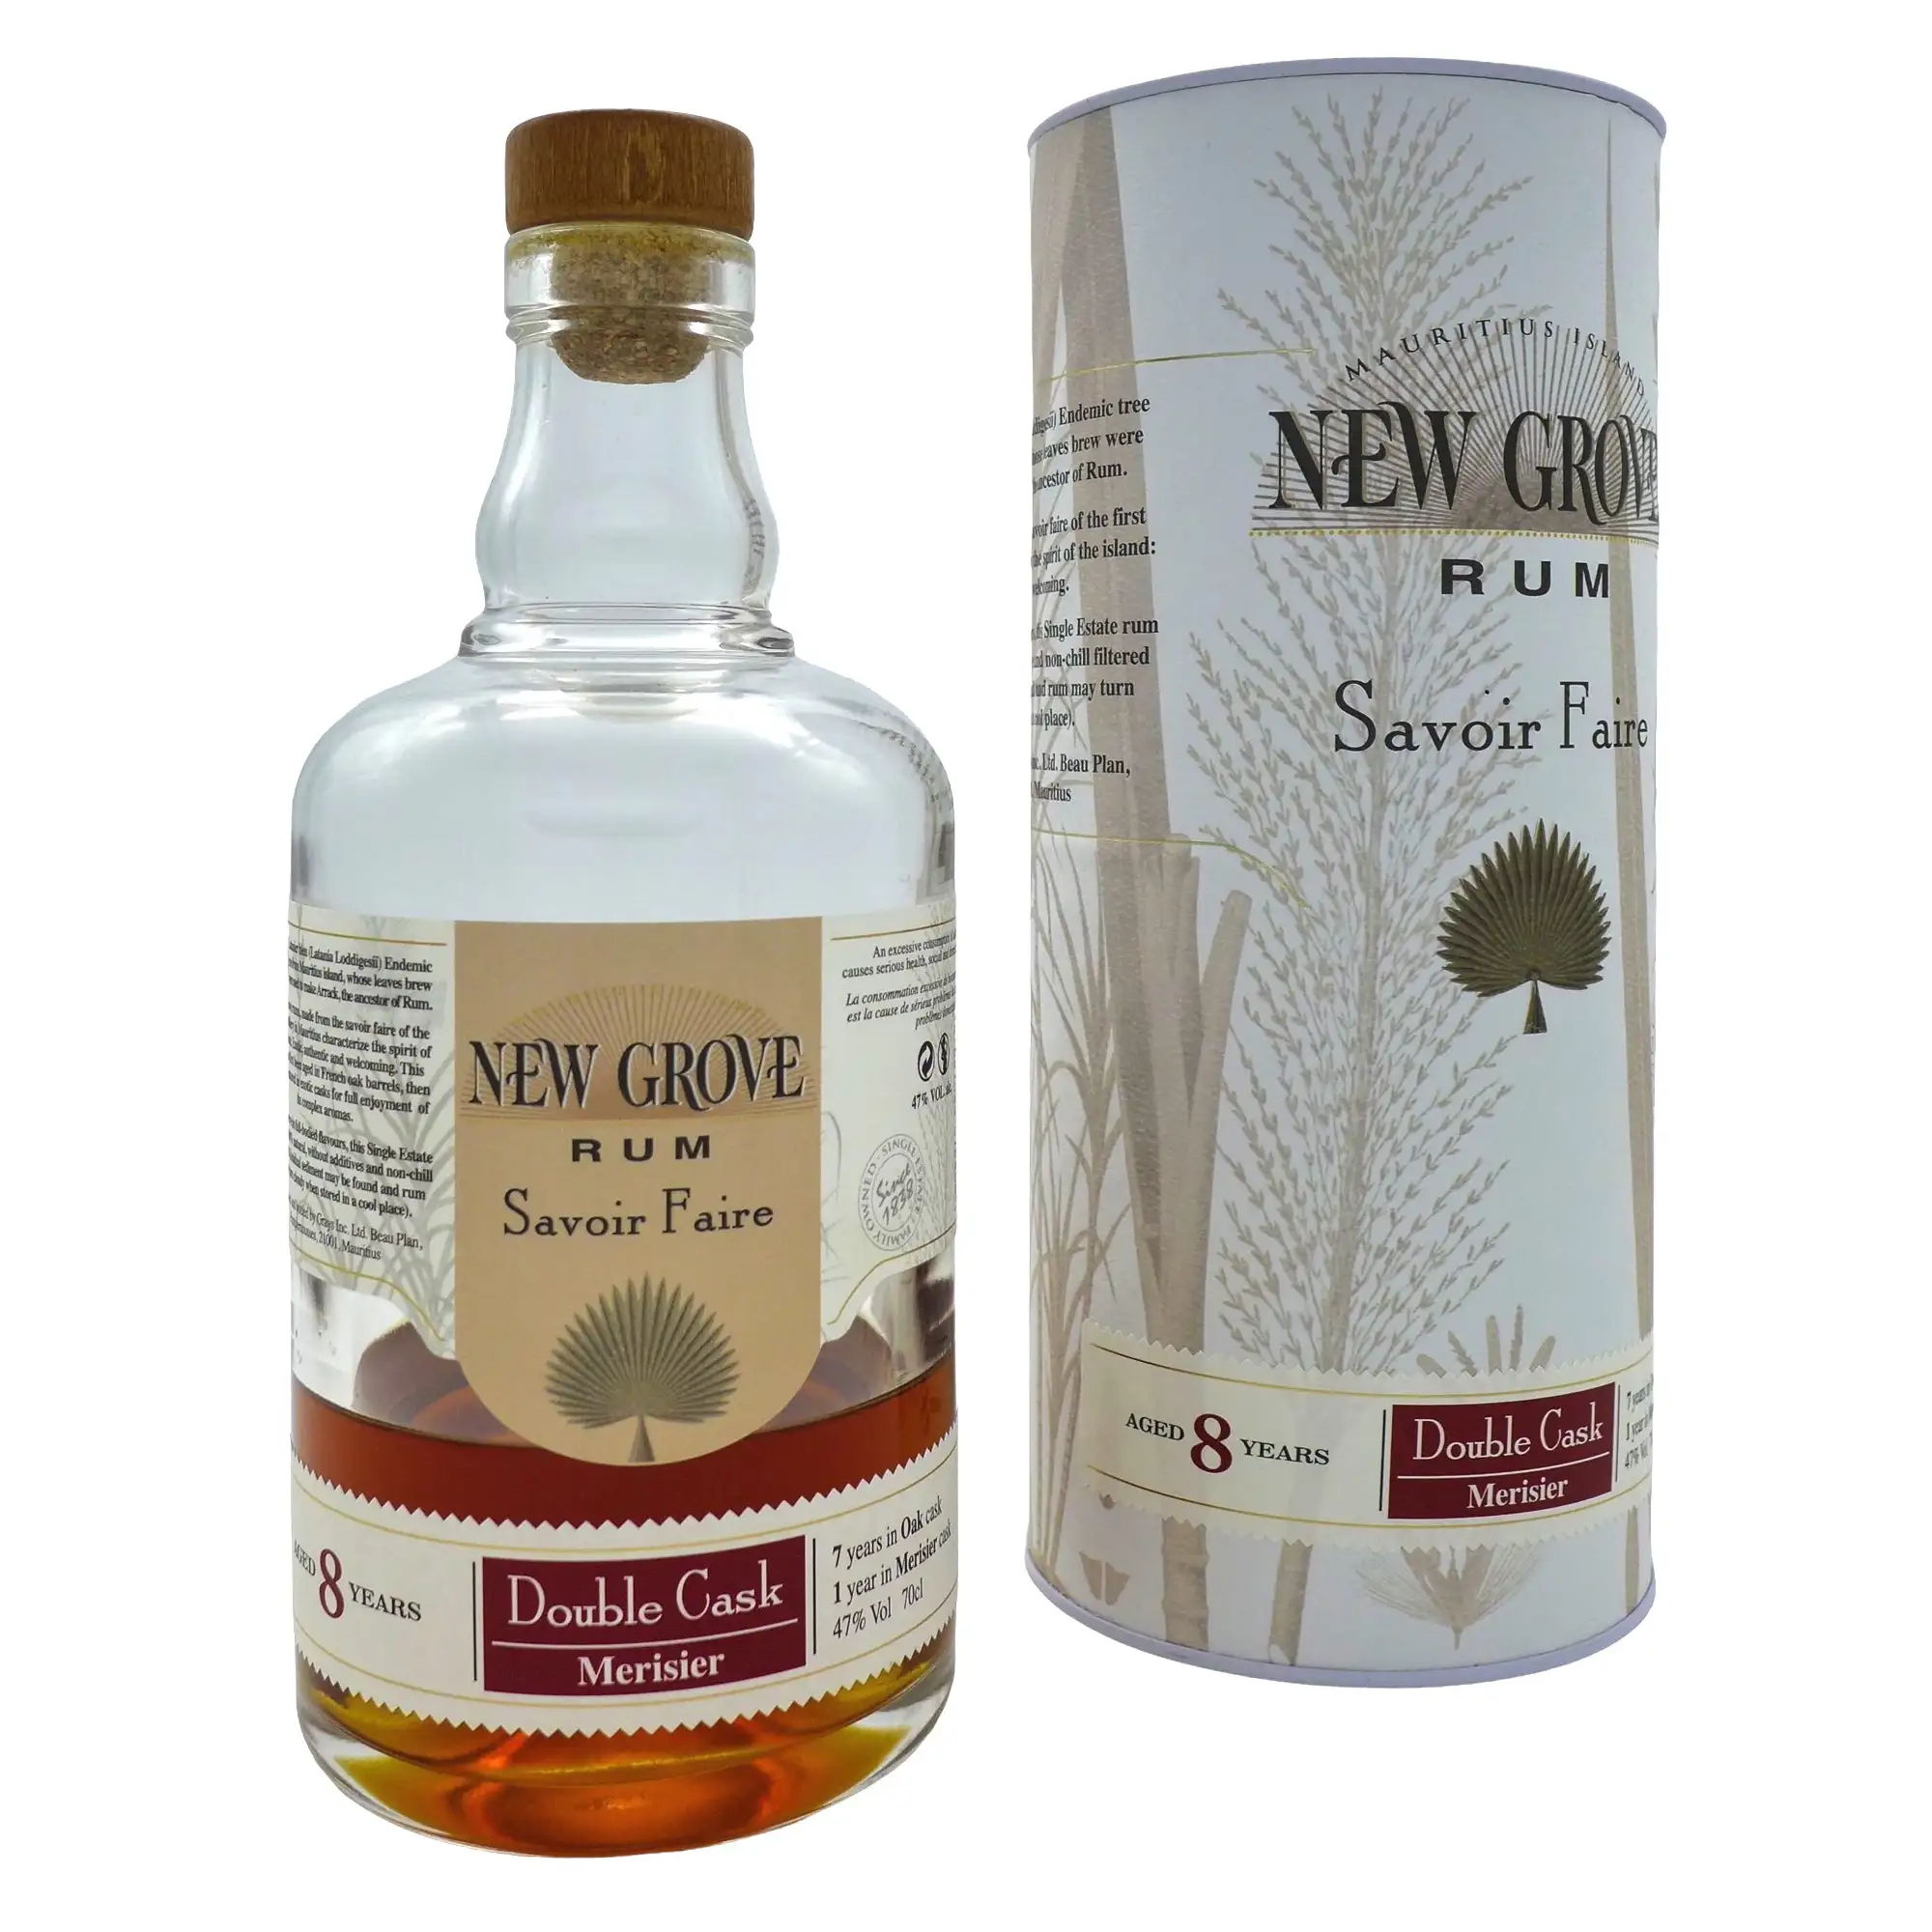 Image of the front of the bottle of the rum New Grove Savoir Faire Double Cask Merisier